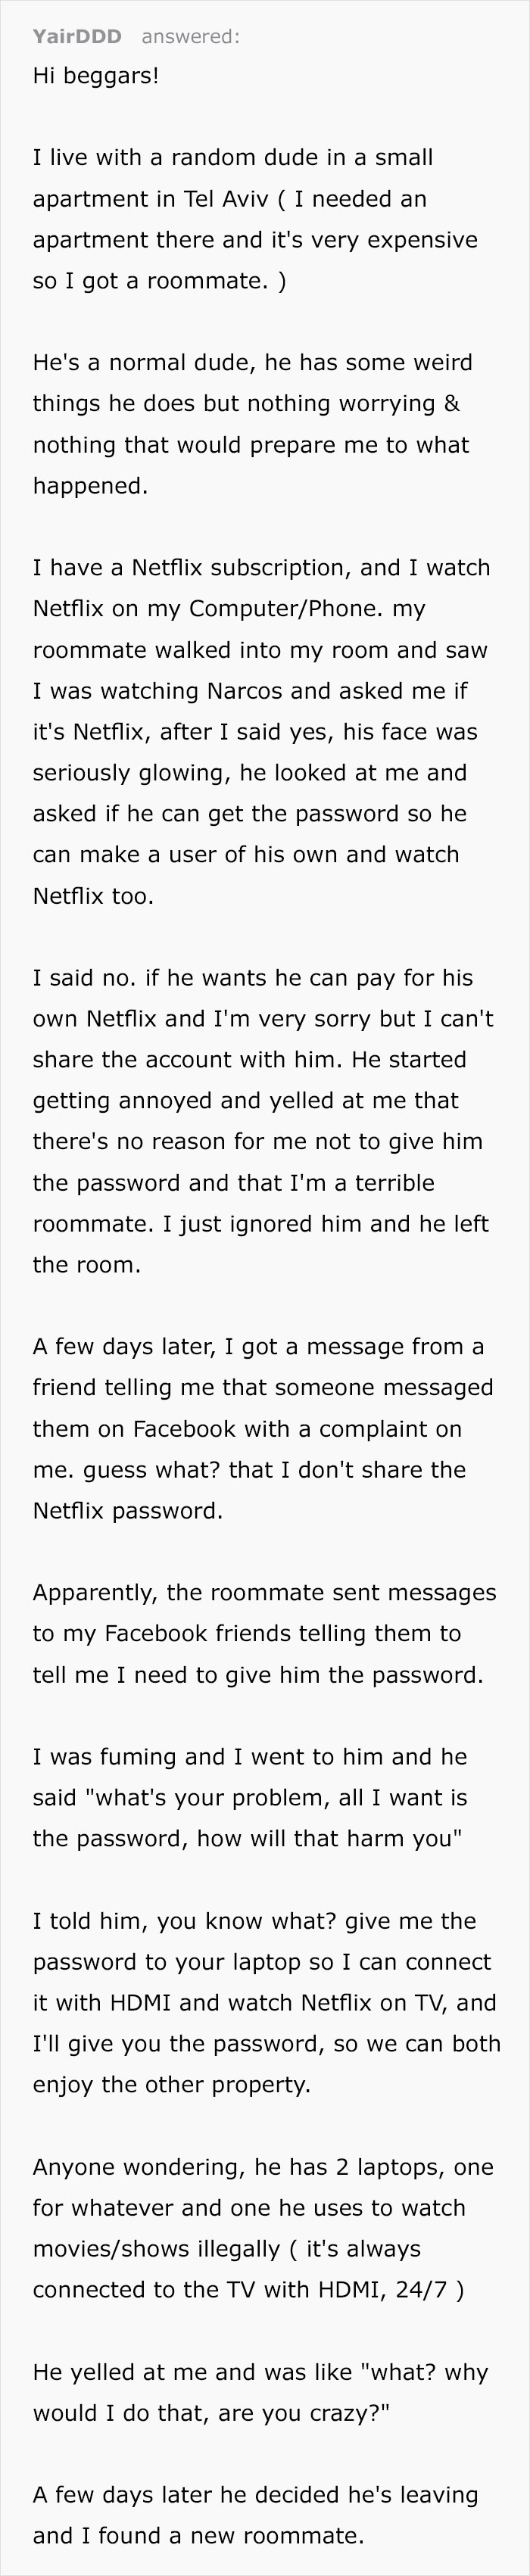 He Wants My Netflix Password With Nothing In Return